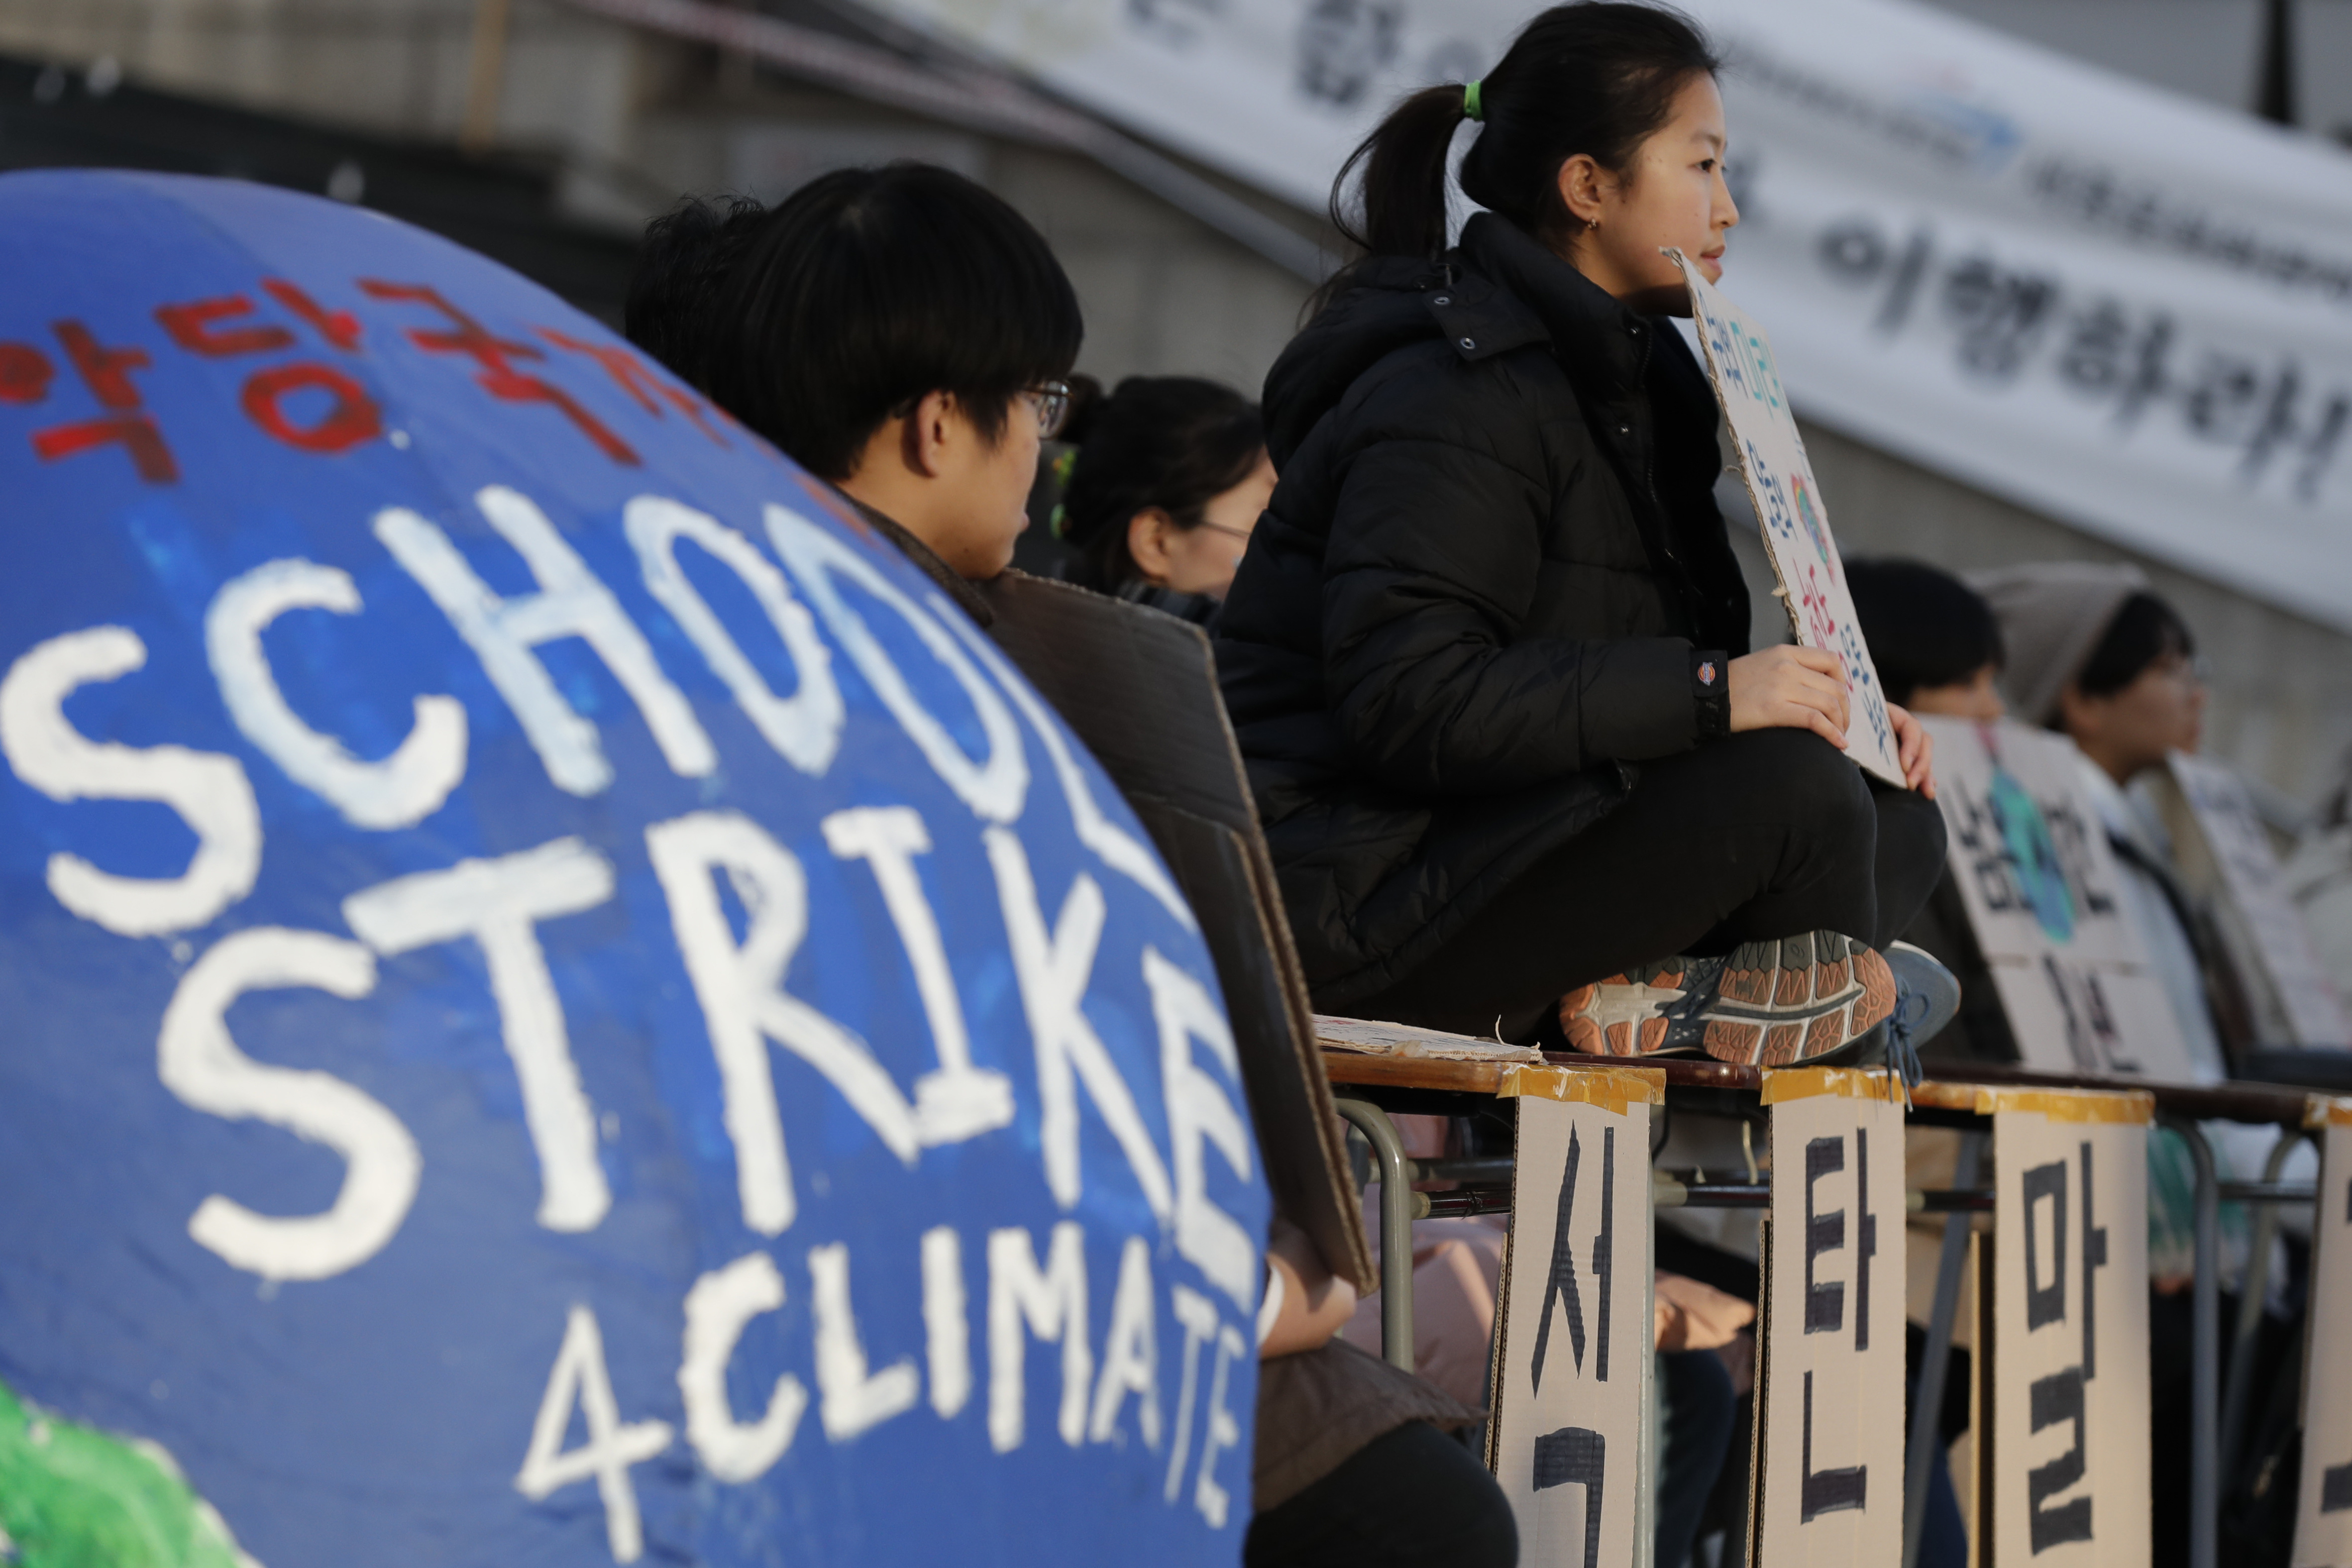 South Korean students hold banners during a rally for climate strike for future in Seoul, South Korea, Friday, Nov. 29, 2019. More than 10 students attended the rally demanding their government to take sufficient action against climate change. (AP Photo/Lee Jin-man)